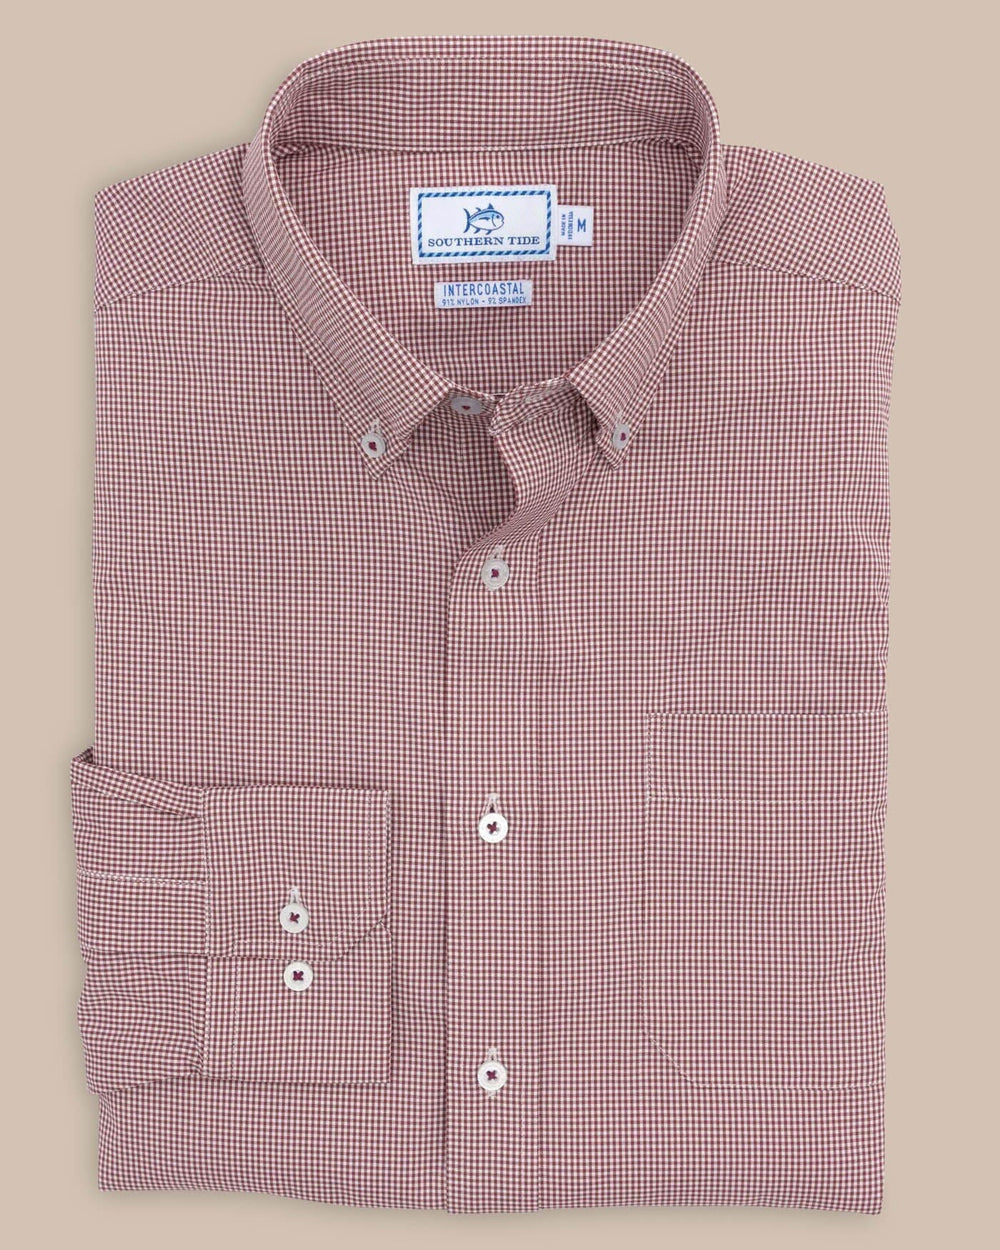 The front view of the Southern Tide Team Colors Gingham Intercoastal Sport Shirt by Southern Tide - Chianti